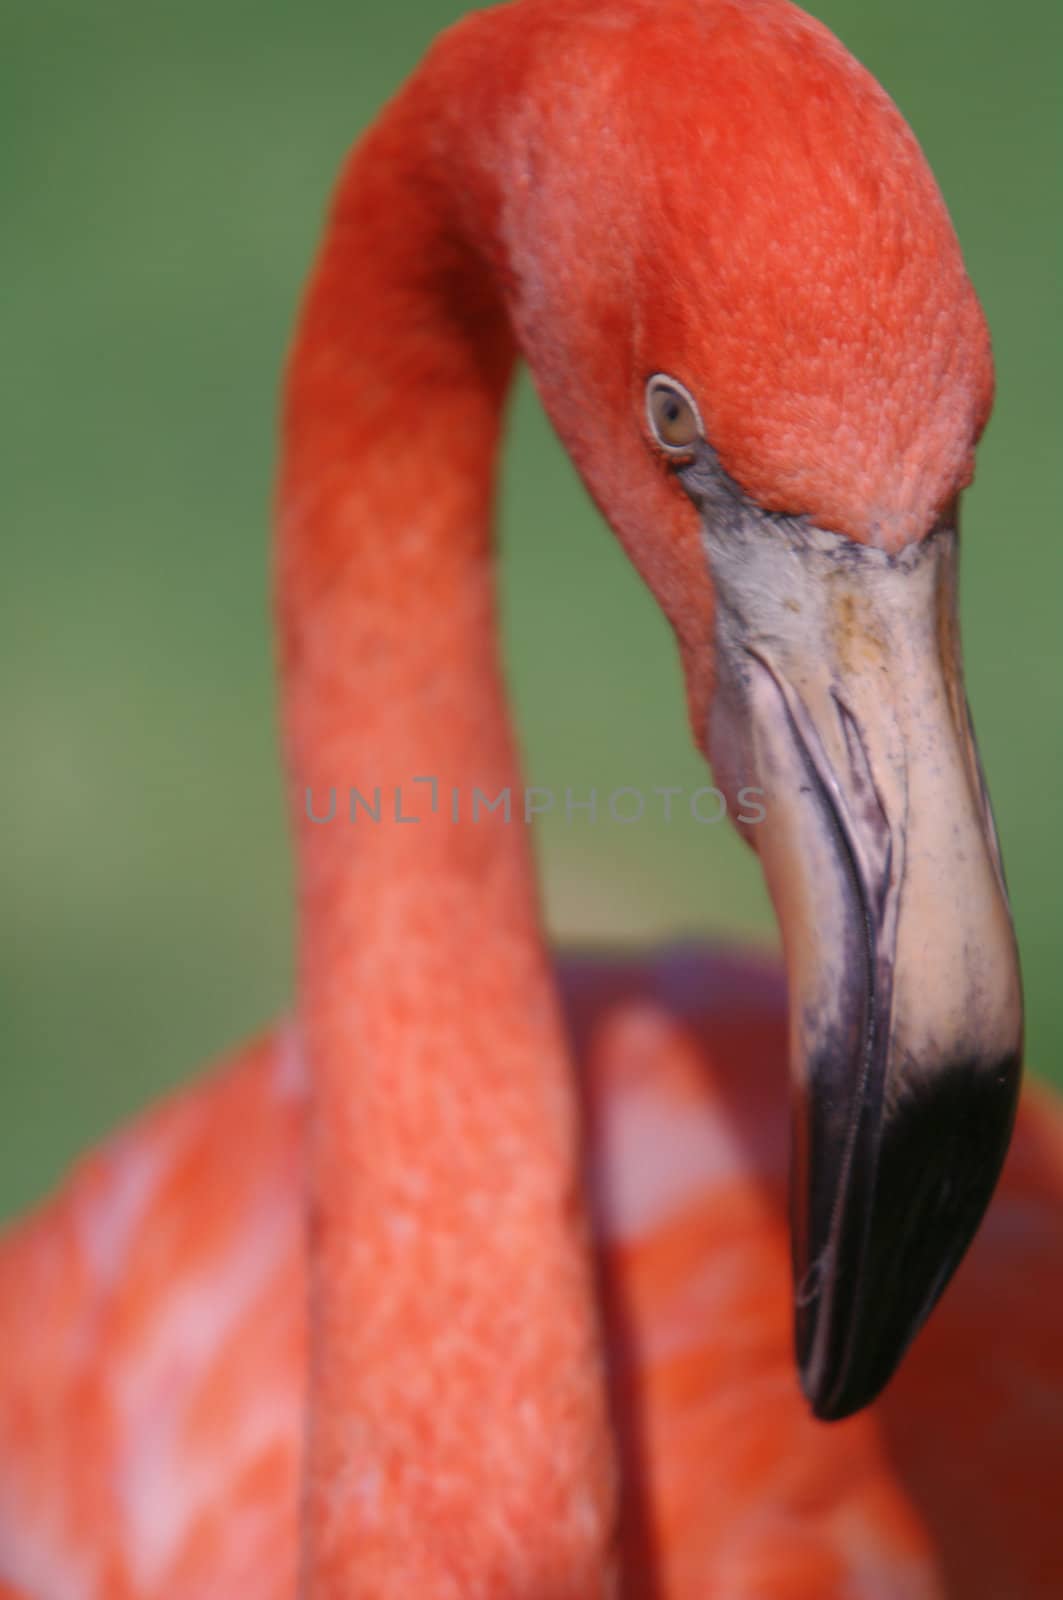 A portrait of a flamingo in a zoo with green background